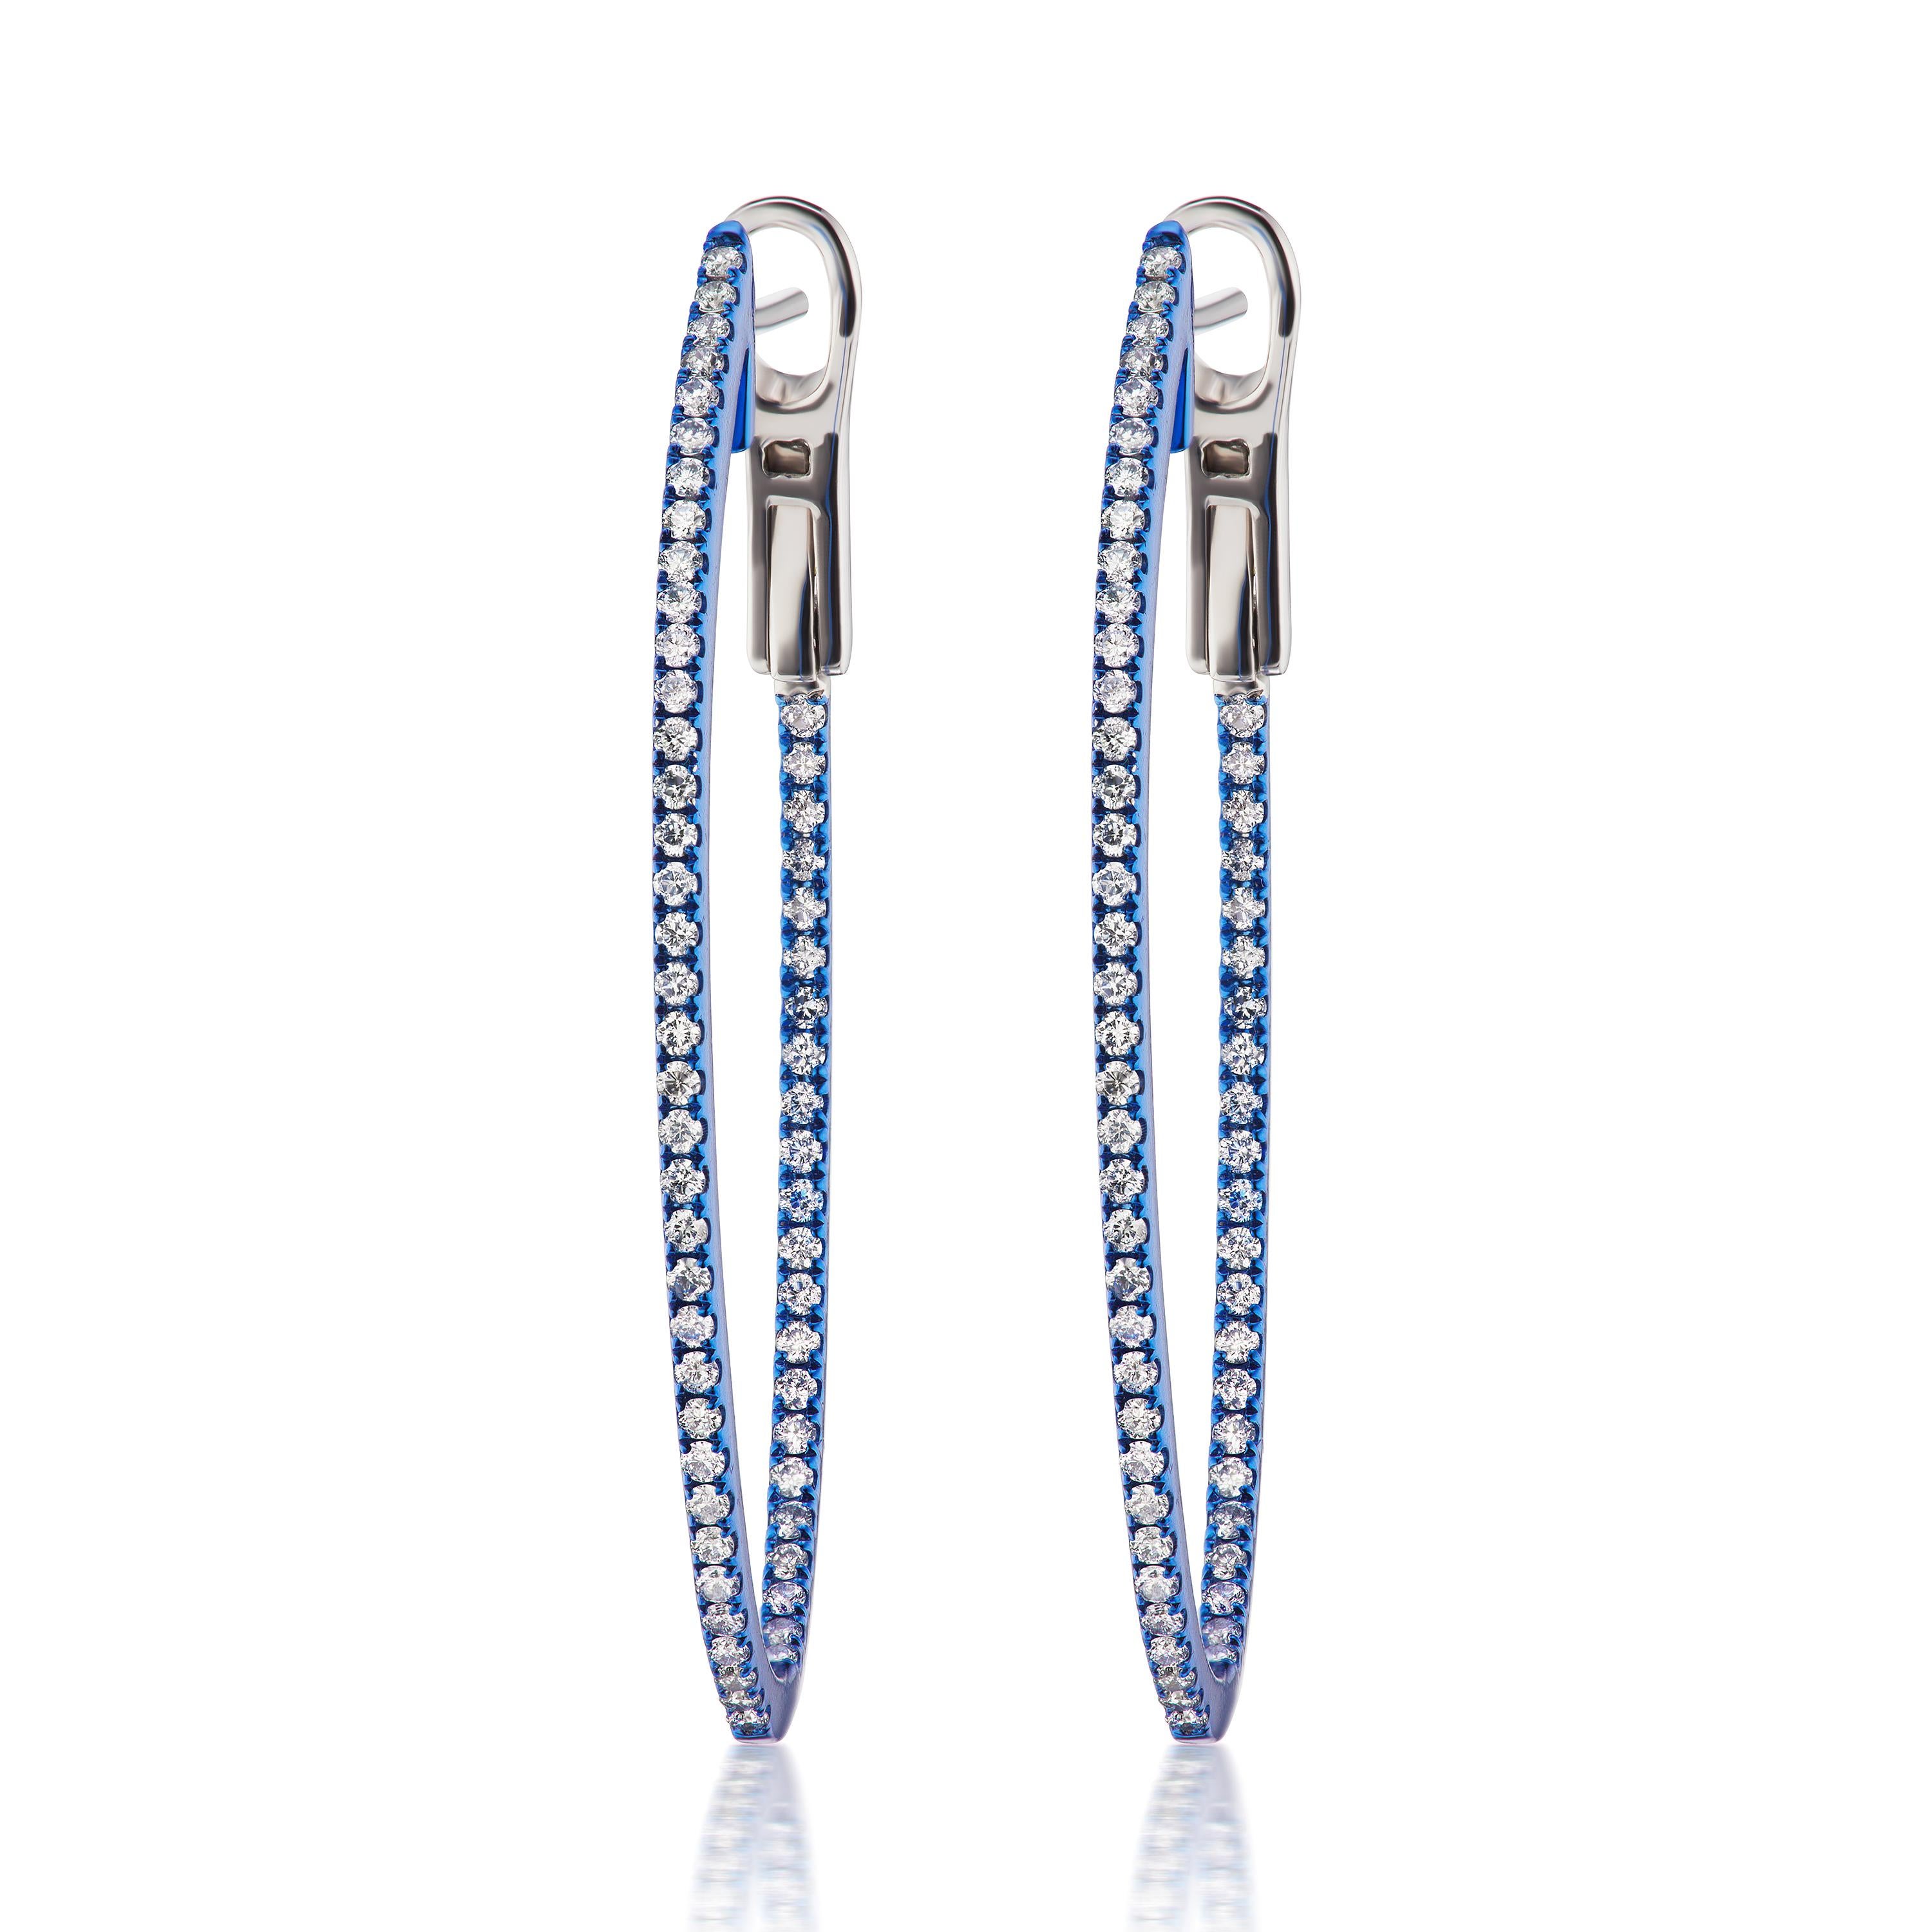 A dazzling pair of hoops featured by Luxle with 116 pave round diamonds embellished inside and outside. Crafted in 14K gold these hoops come with omega backs. The blue rhodium adds a pop of color to the pair.
Please follow the Luxury Jewels